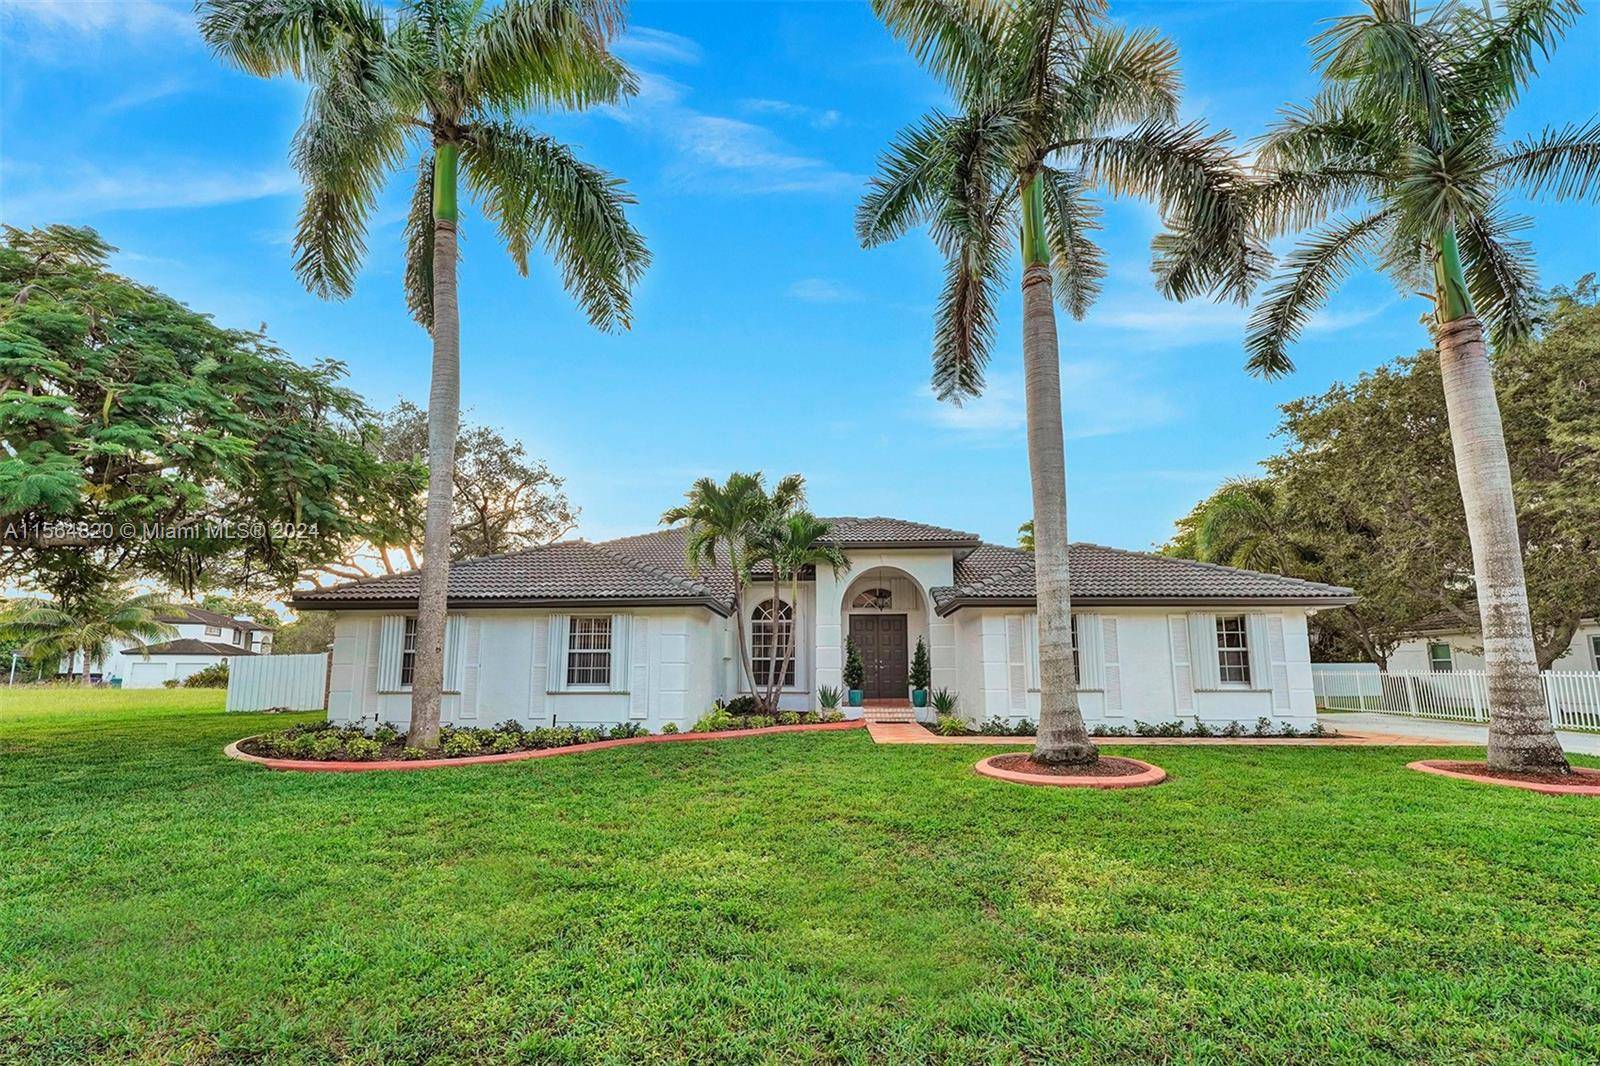 Don't miss out on this spectacular and recently renovated estate home on an oversized lot in one of the finest neighborhoods in Cutler Bay.